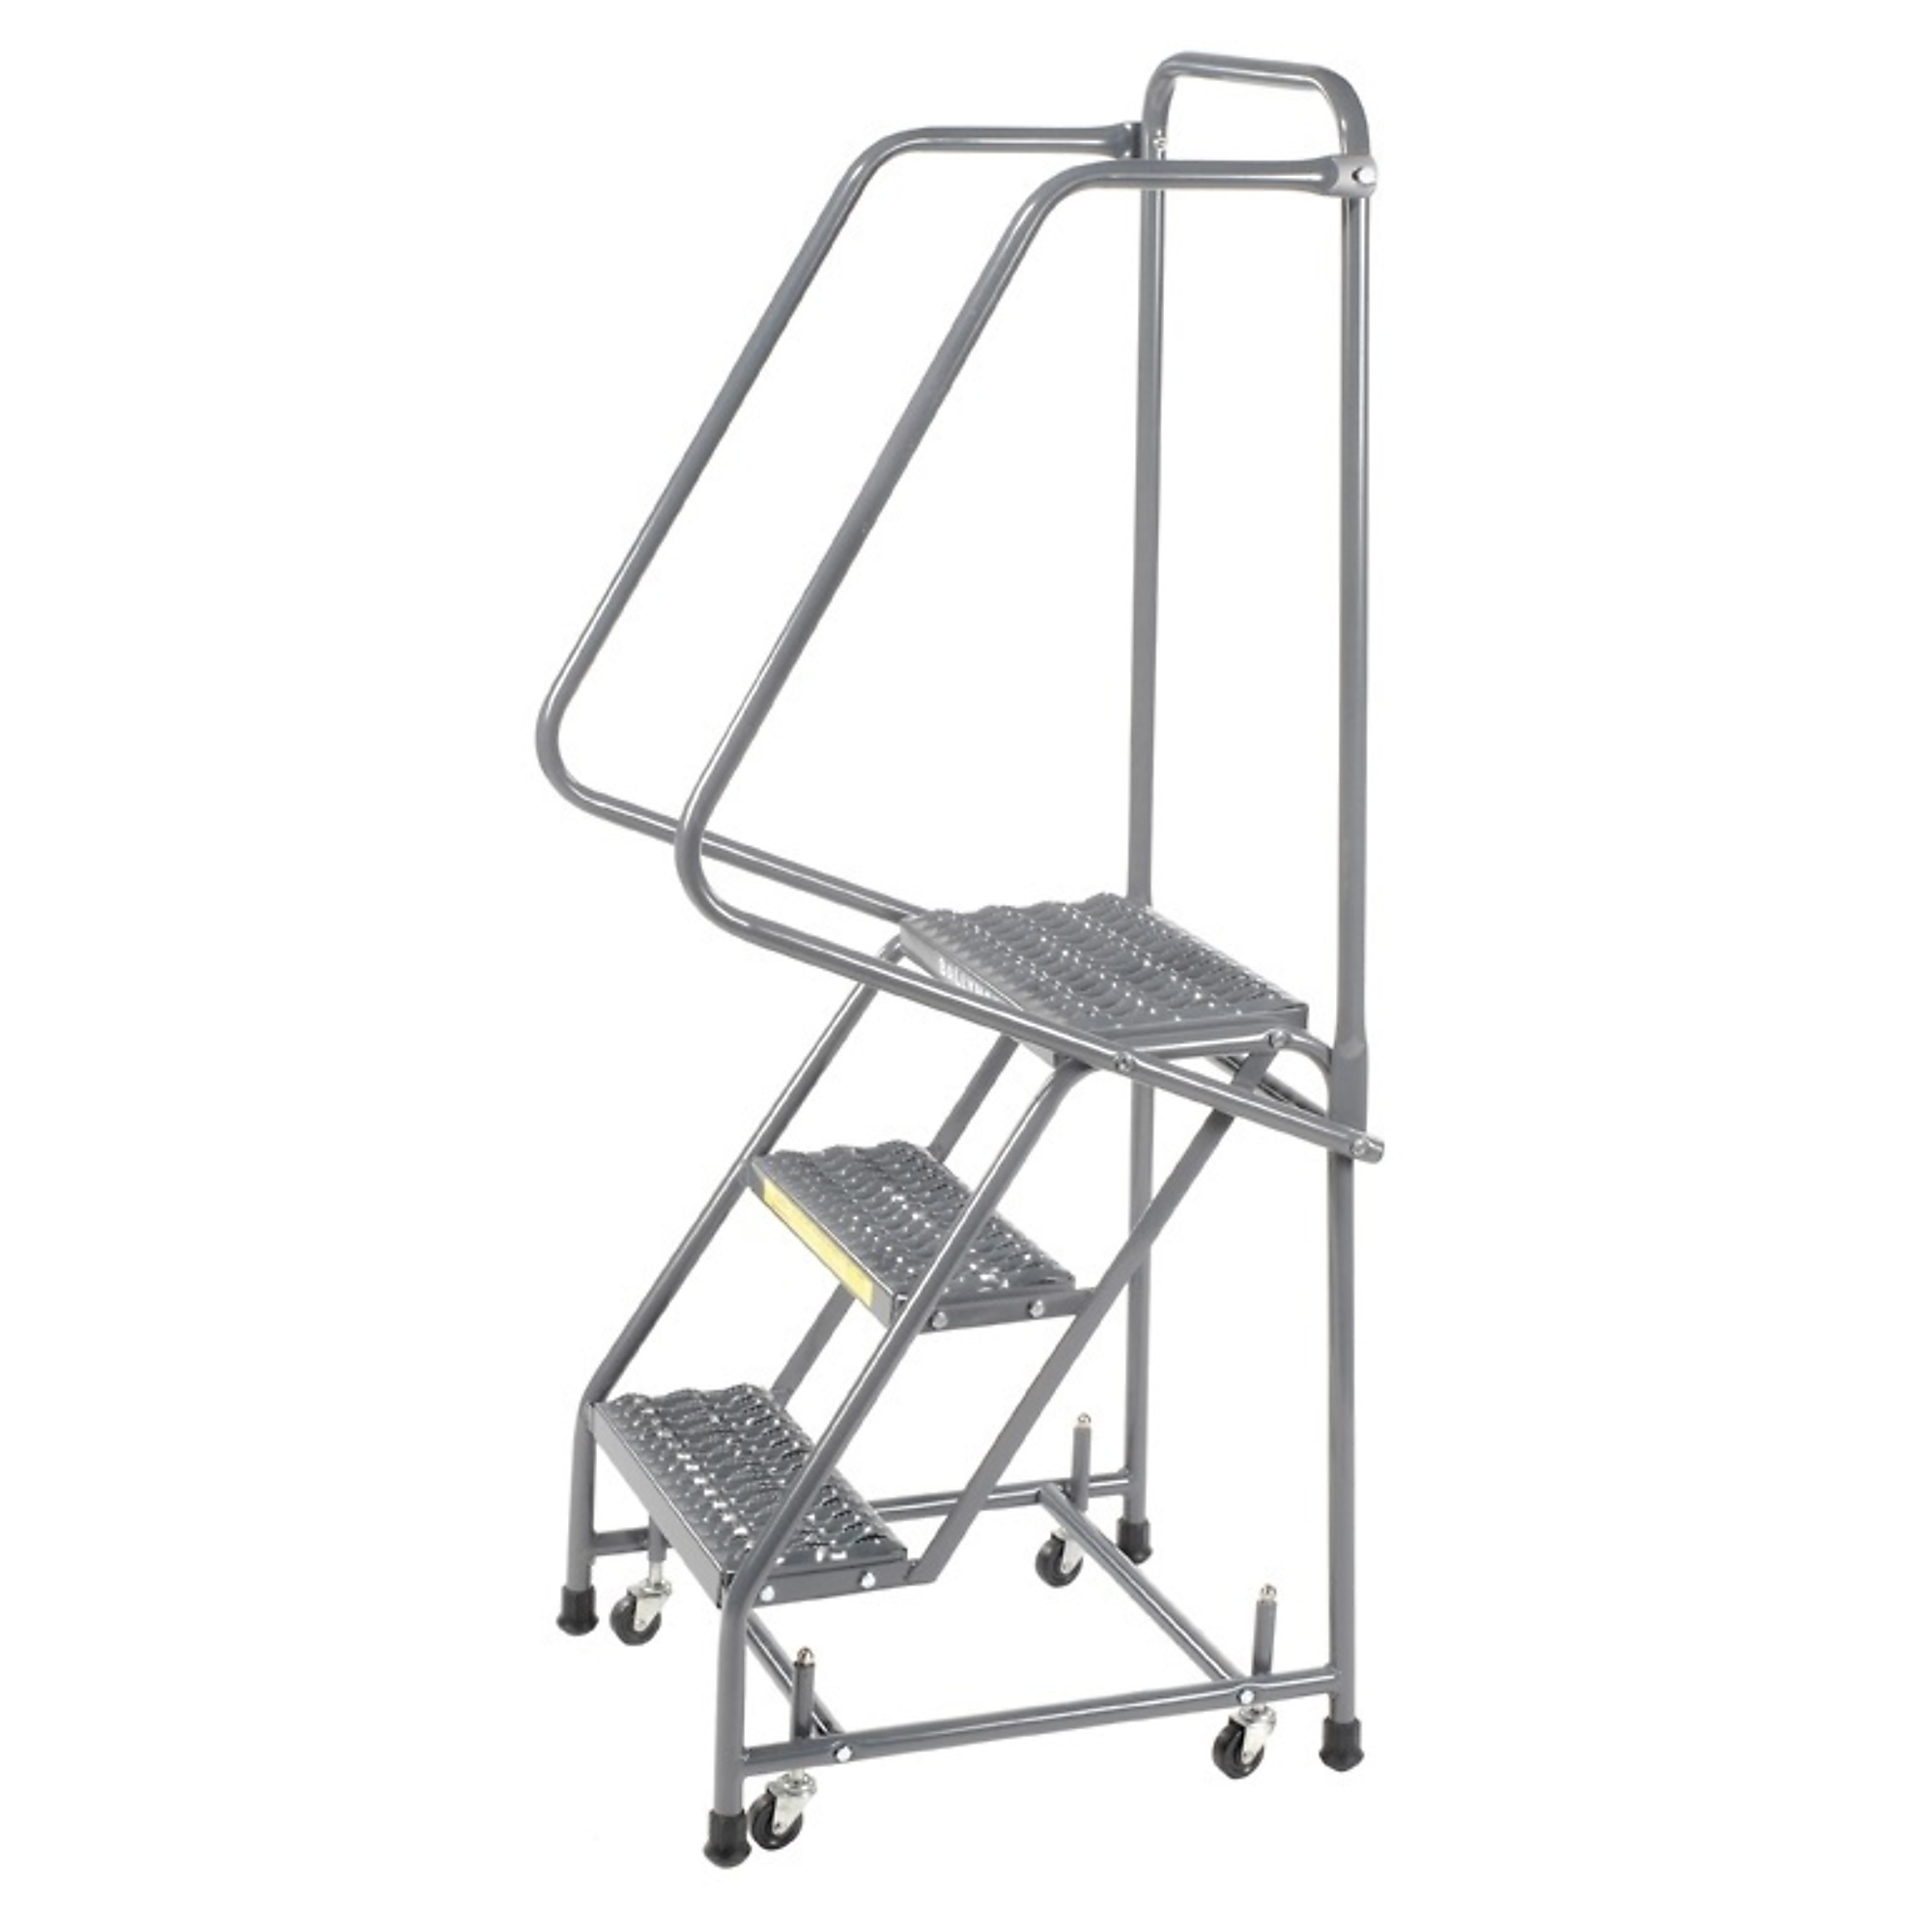 Ballymore, Rolling Ladder, Overall Height 58.5 in, Steps 3, Material Steel, Model H318P